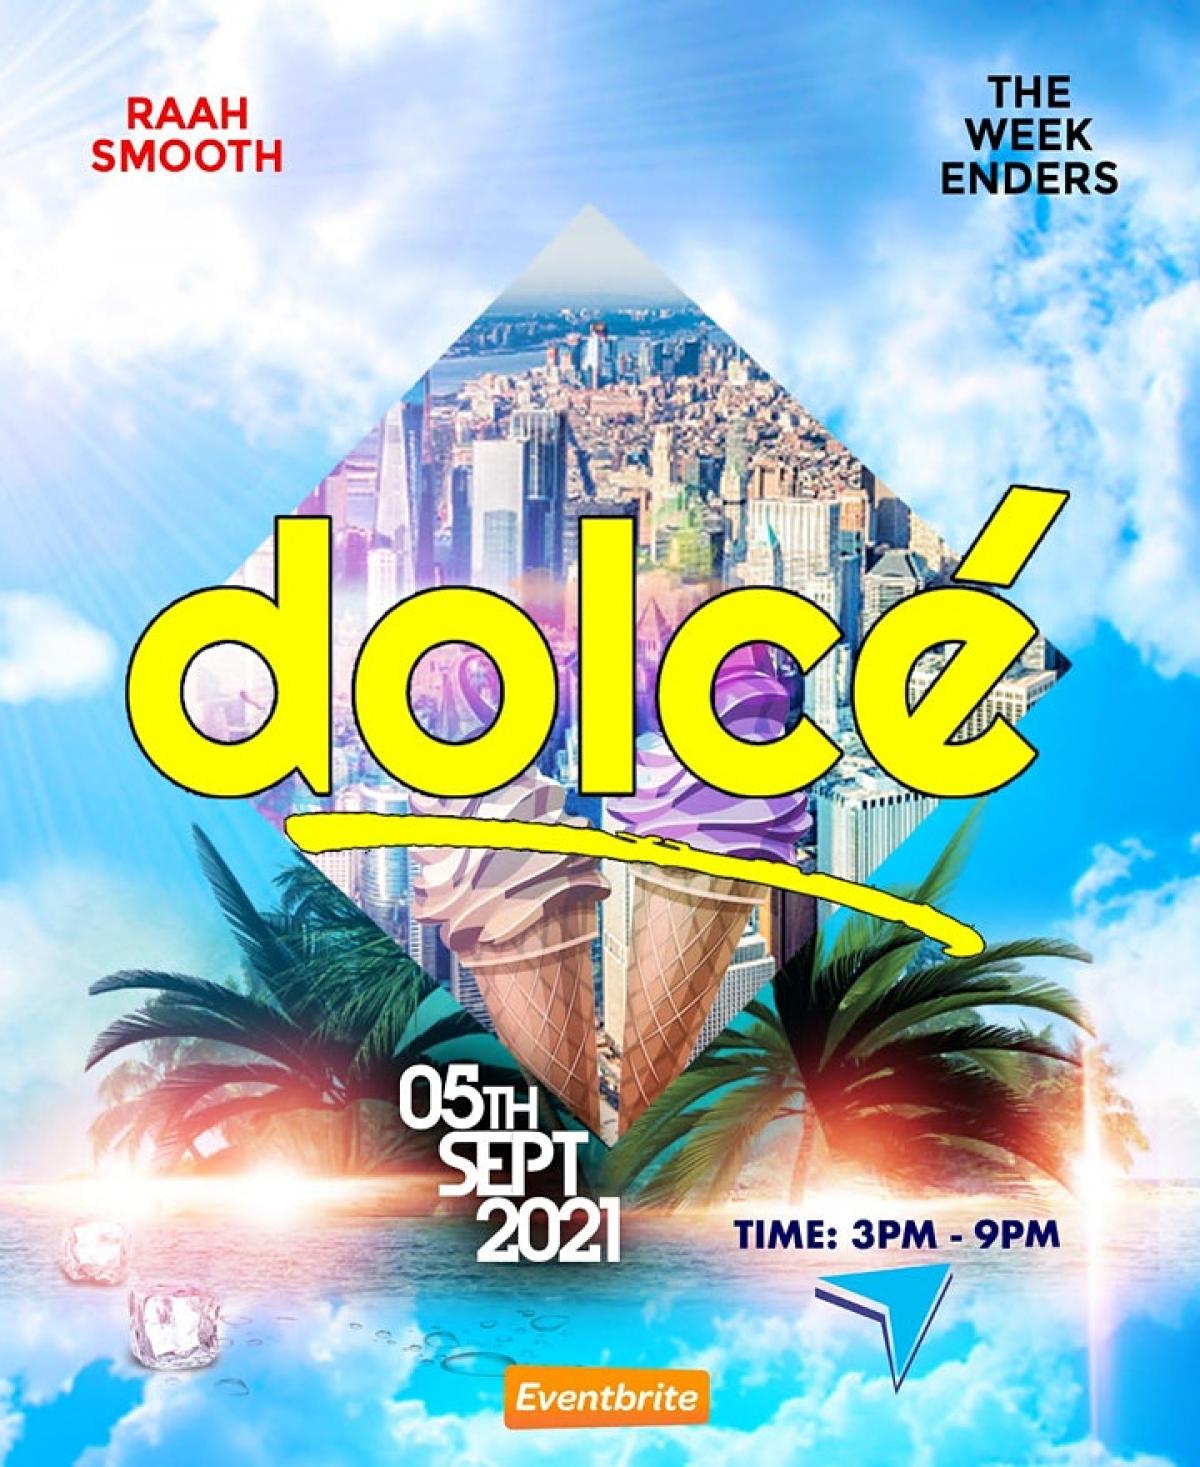 Dolce flyer or graphic.